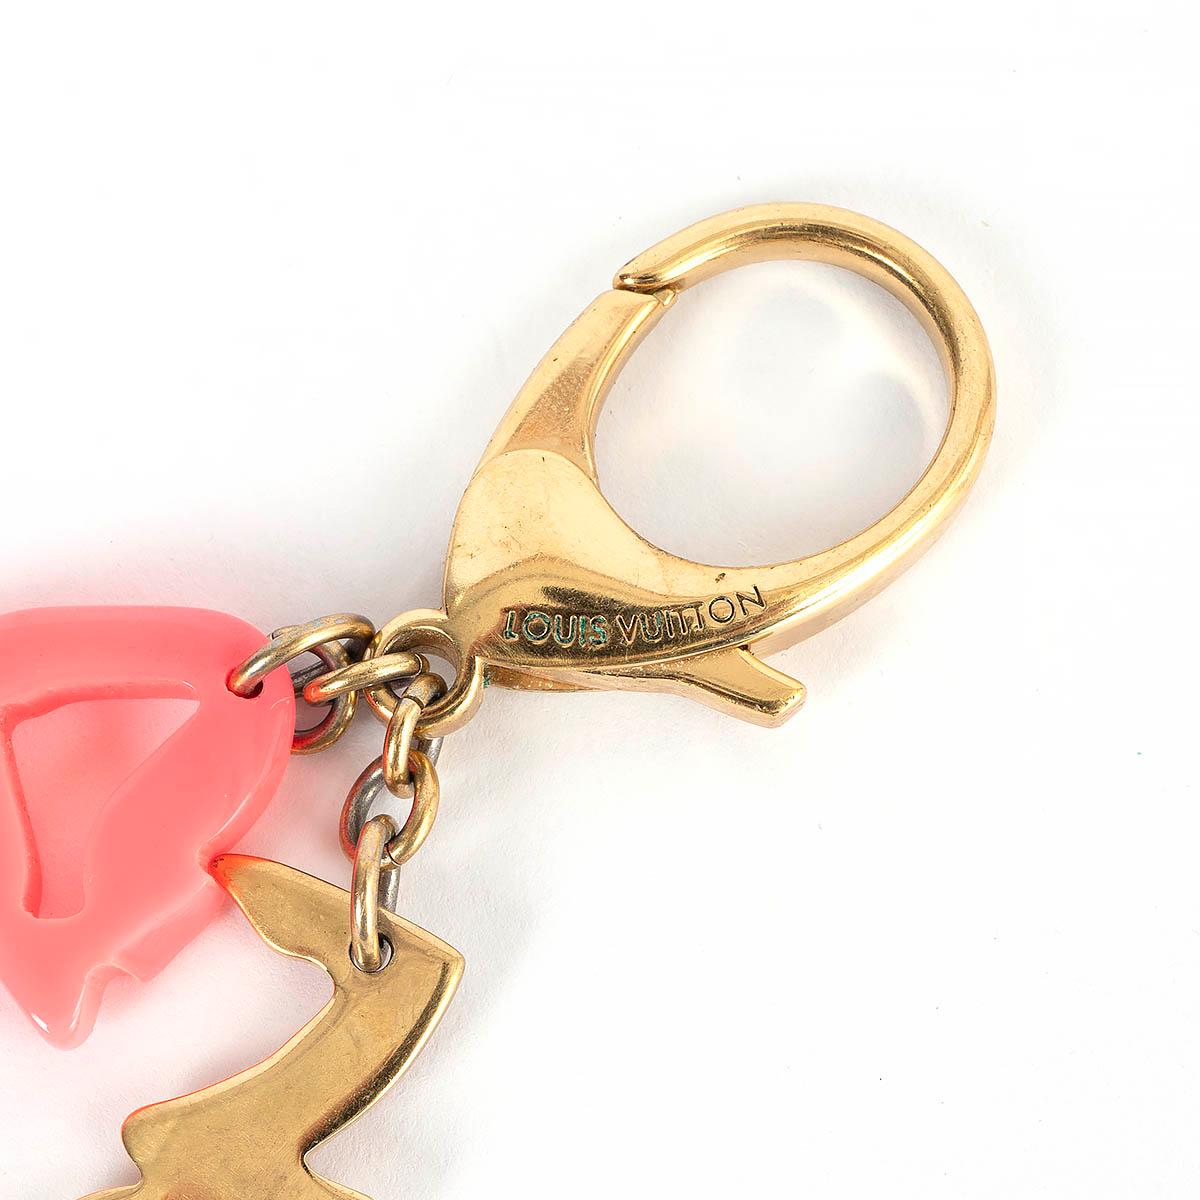 Beige LOUIS VUITTON neon pink & gold STEPHEN SPROUSE GRAFFITI Keyring Keychain For Sale